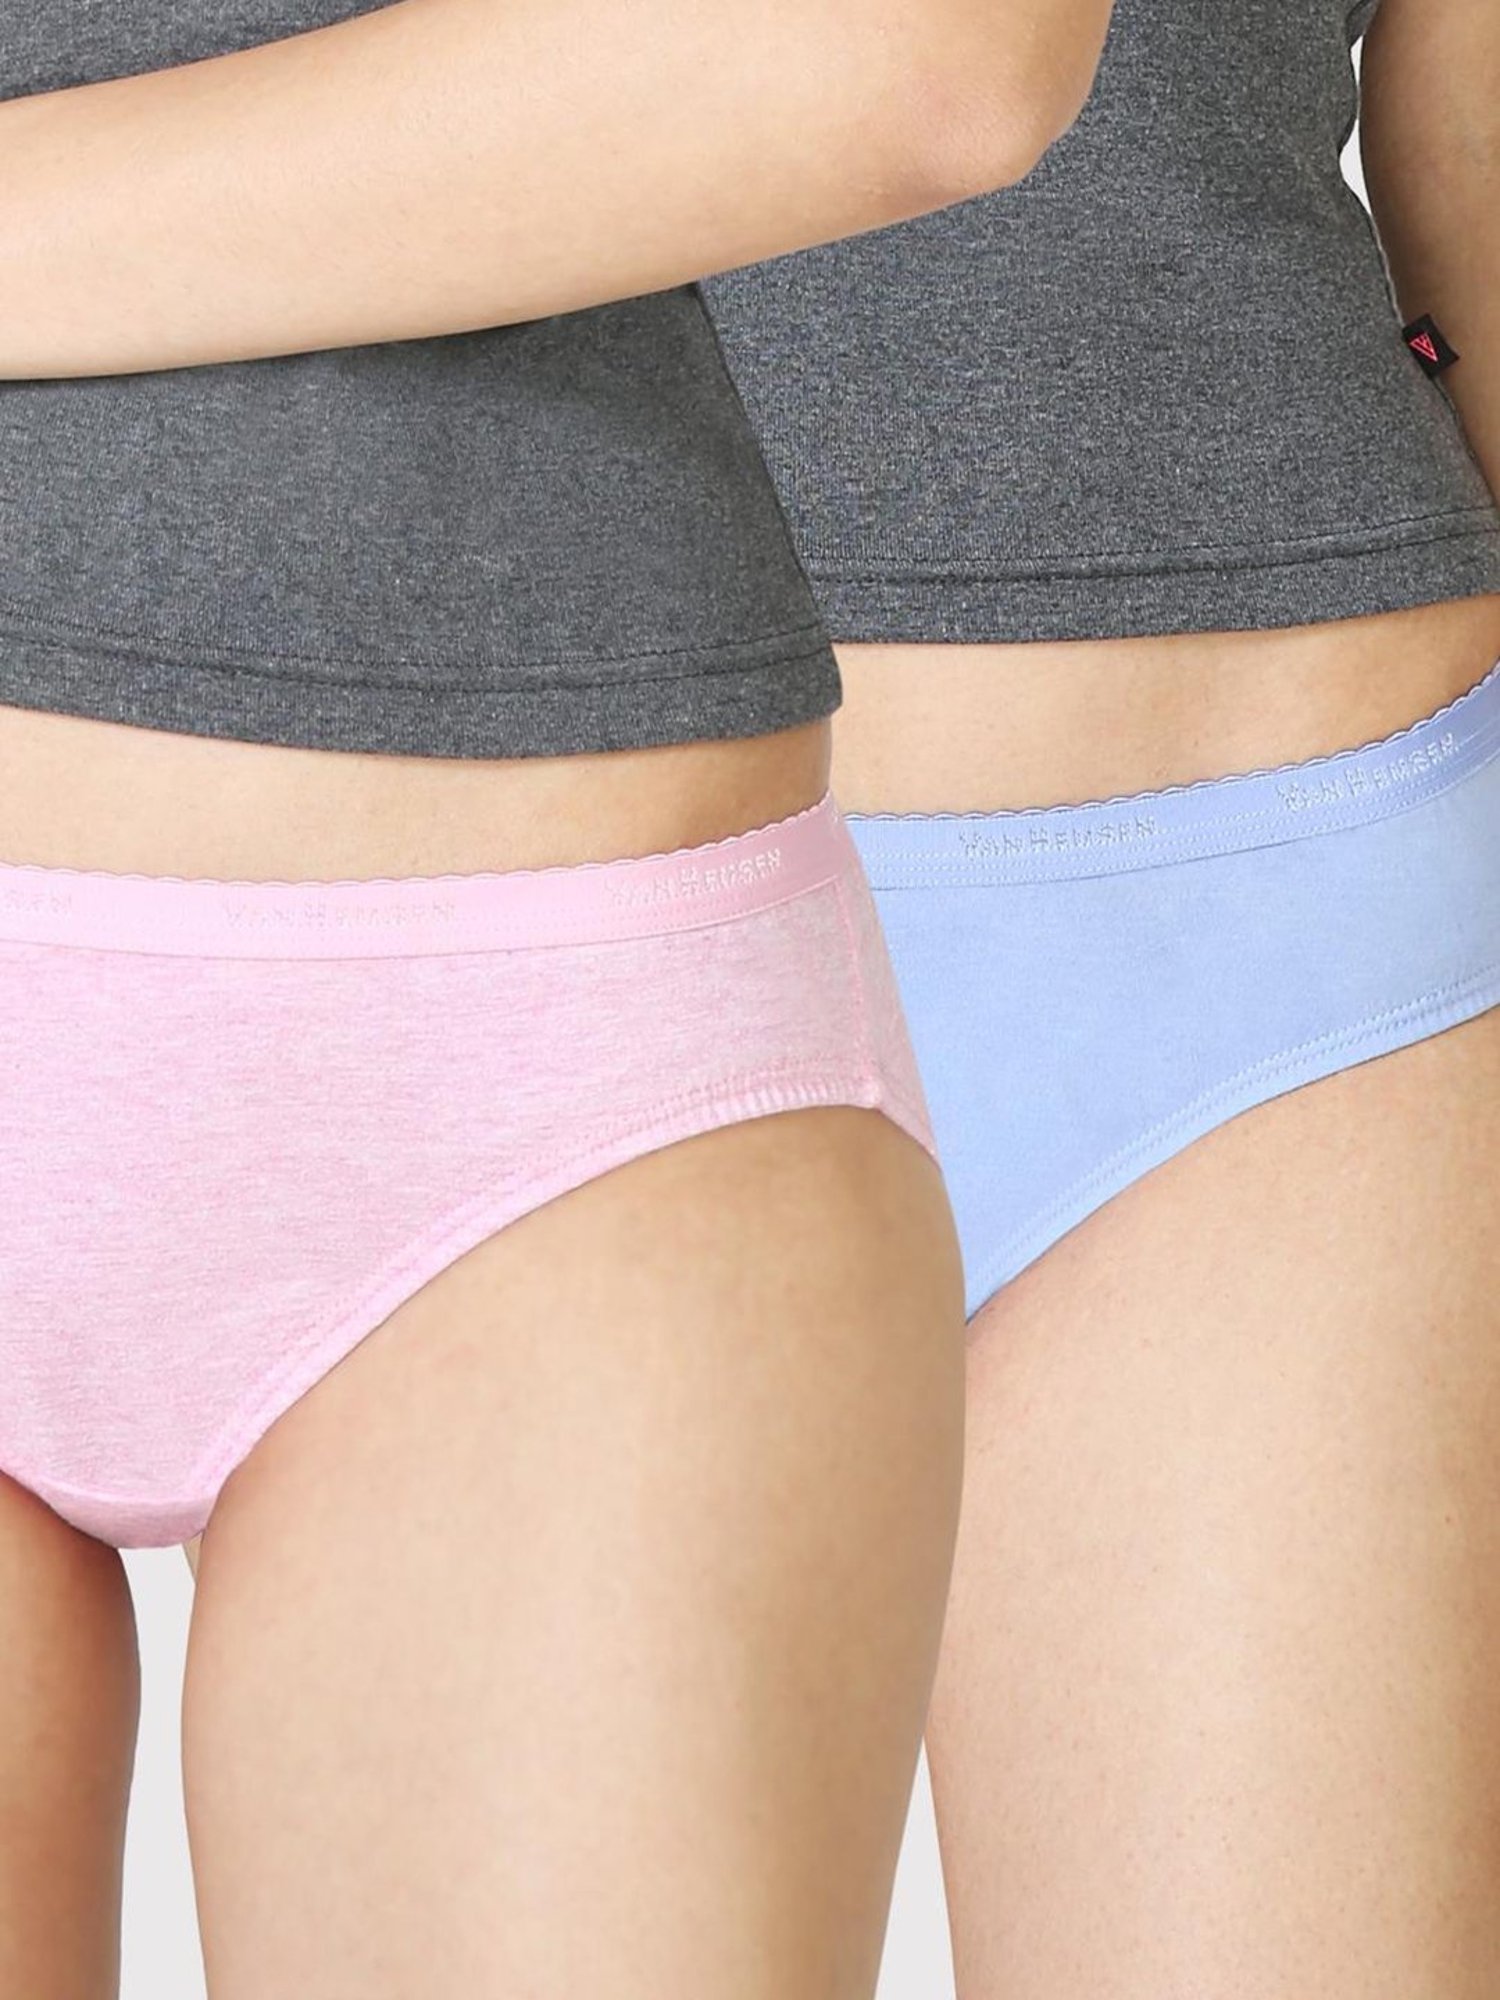 Clovia Panties Offers : Buy Any 5 Panties At Rs 99 Each Only